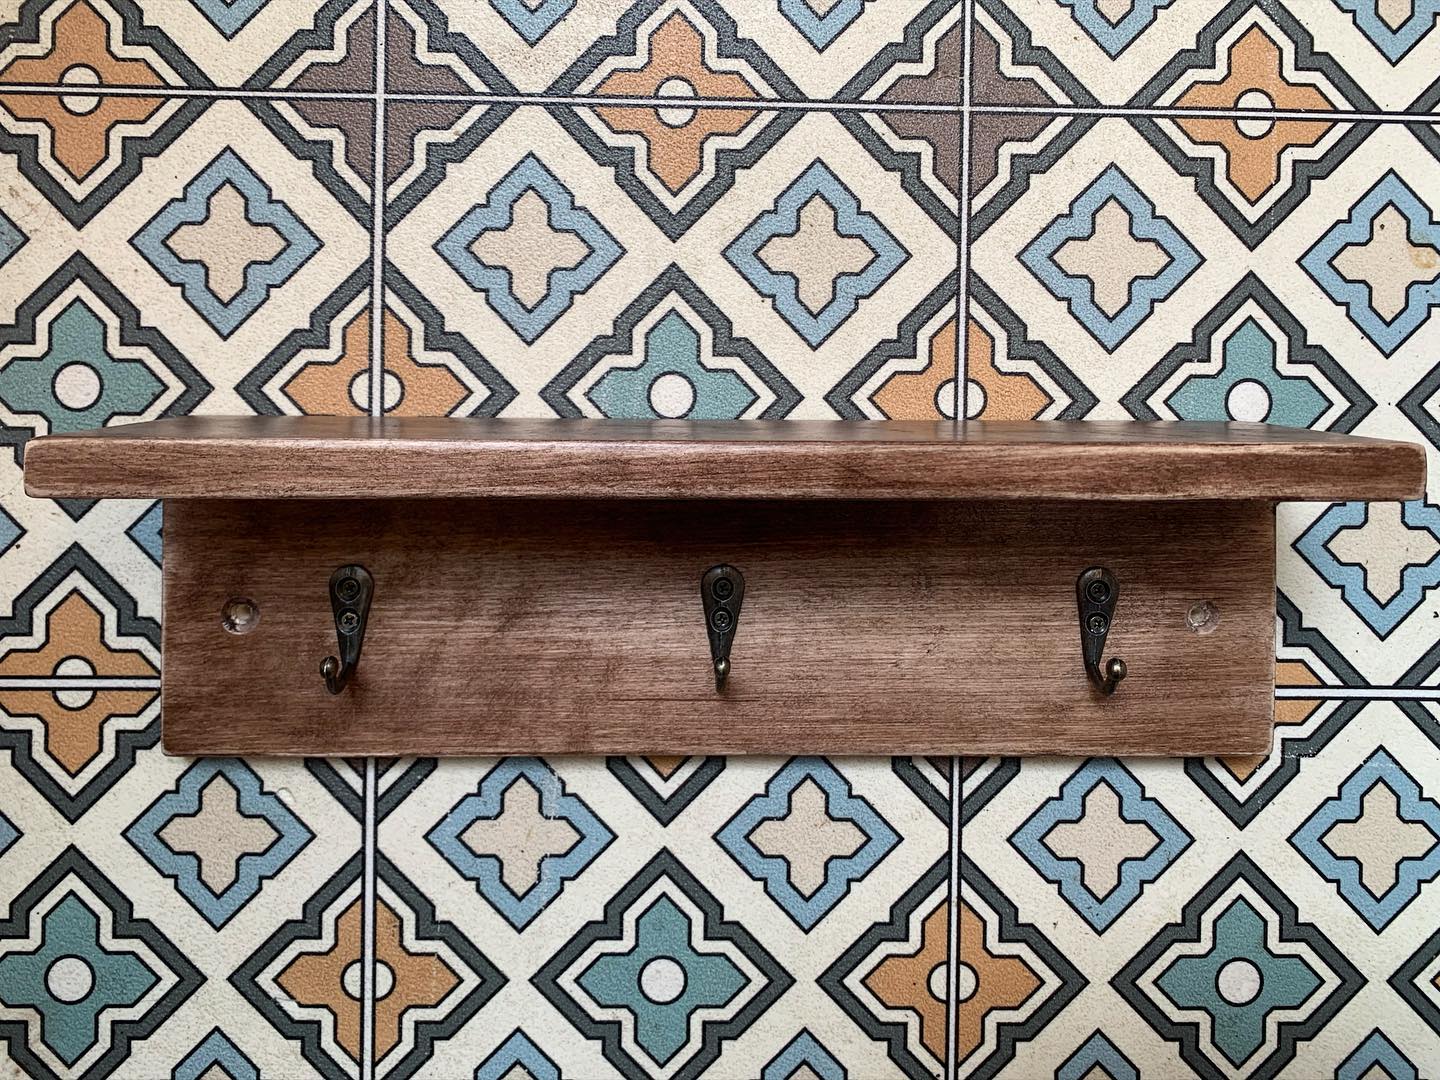 We have made some more of these little shelf hooks! And have 1 remaining, £12 including shipping. If Anyone would like it, let us know. We are also working on some oak, peg hook versions without a shelf which we hope will be available at upcoming markets. Next date booked is the @thecraftandflea on the 25th of this month at Paintworks in Bristol ? PRODUCT INFO-W30cm x H9cm x Shelf Depth 8cm Made from white wood and finished with a walnut varnish and slightly aged effect, this triple hook shelf tidy is ideal for a hallway or small space. Great for essentials such as mask, keys and shopping bag, or perfect for jewellery and small accessories.Hooks are h3cm x 2.5cm (internally h0.8x1.5cm)Fix to the wall using the 2 countersunk screw holes (Screws and wall plugs not included, please use suitable fixings to safely install)